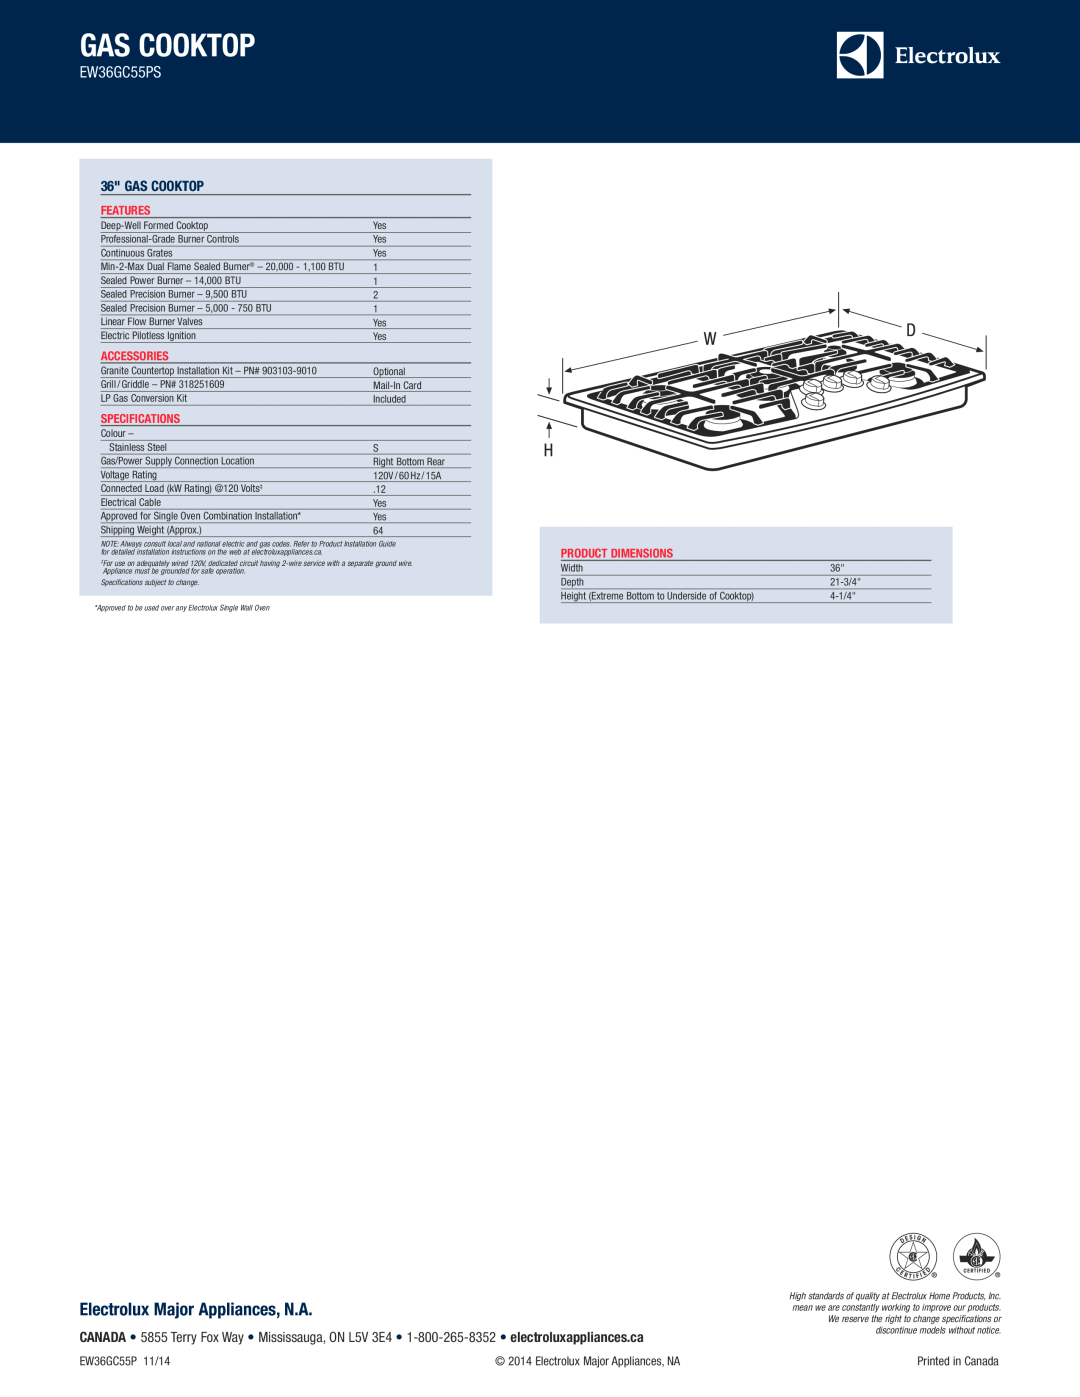 Electrolux EW36GC55PS dimensions Electrolux Major Appliances, N.A, gas cooktop, Features, Accessories, Specifications 